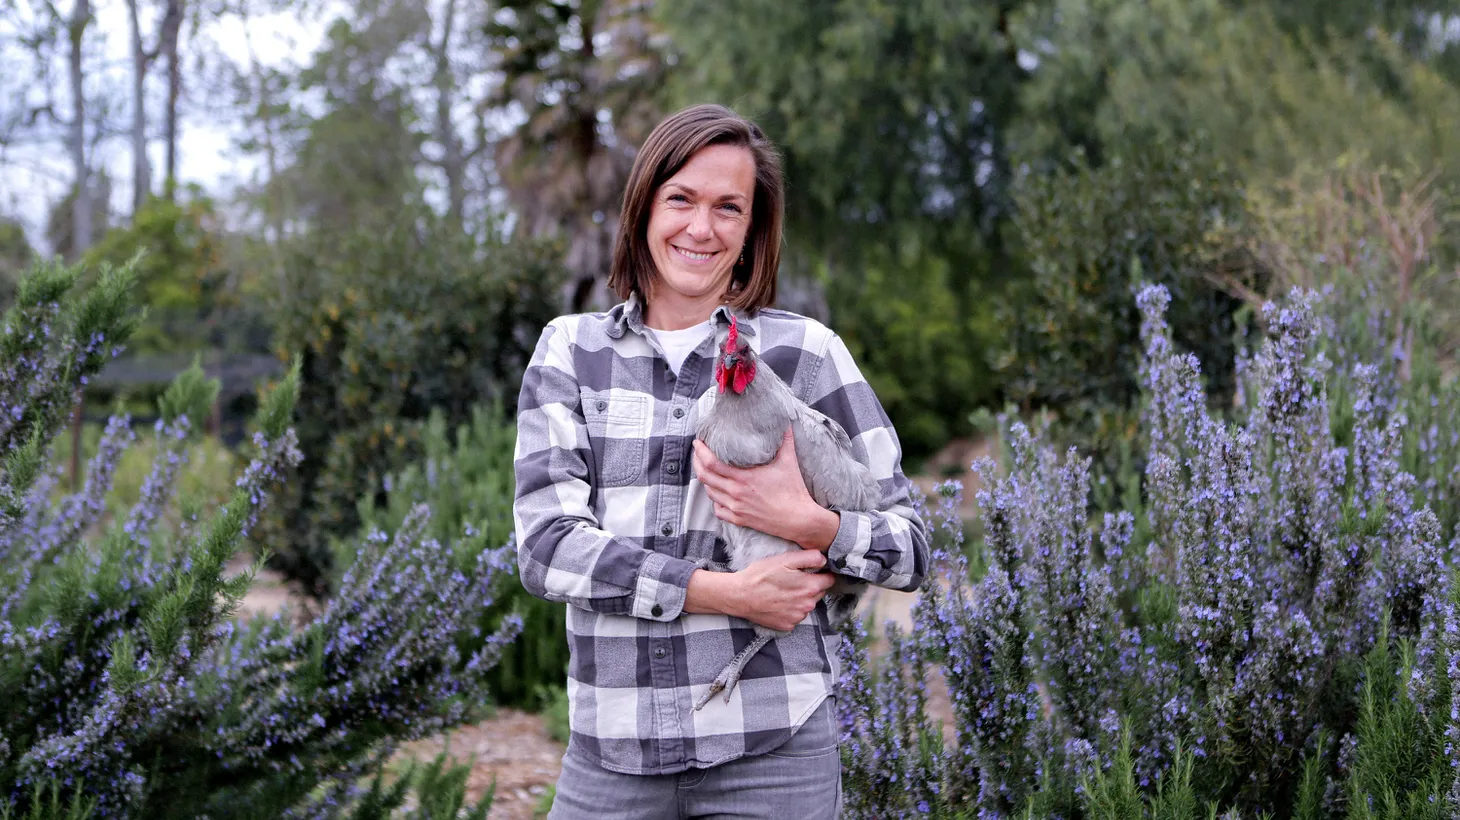 Lead Photo: “The learning is infinite,” says Molly Chester of transforming Apricot Lane Farms over the last 10 years.